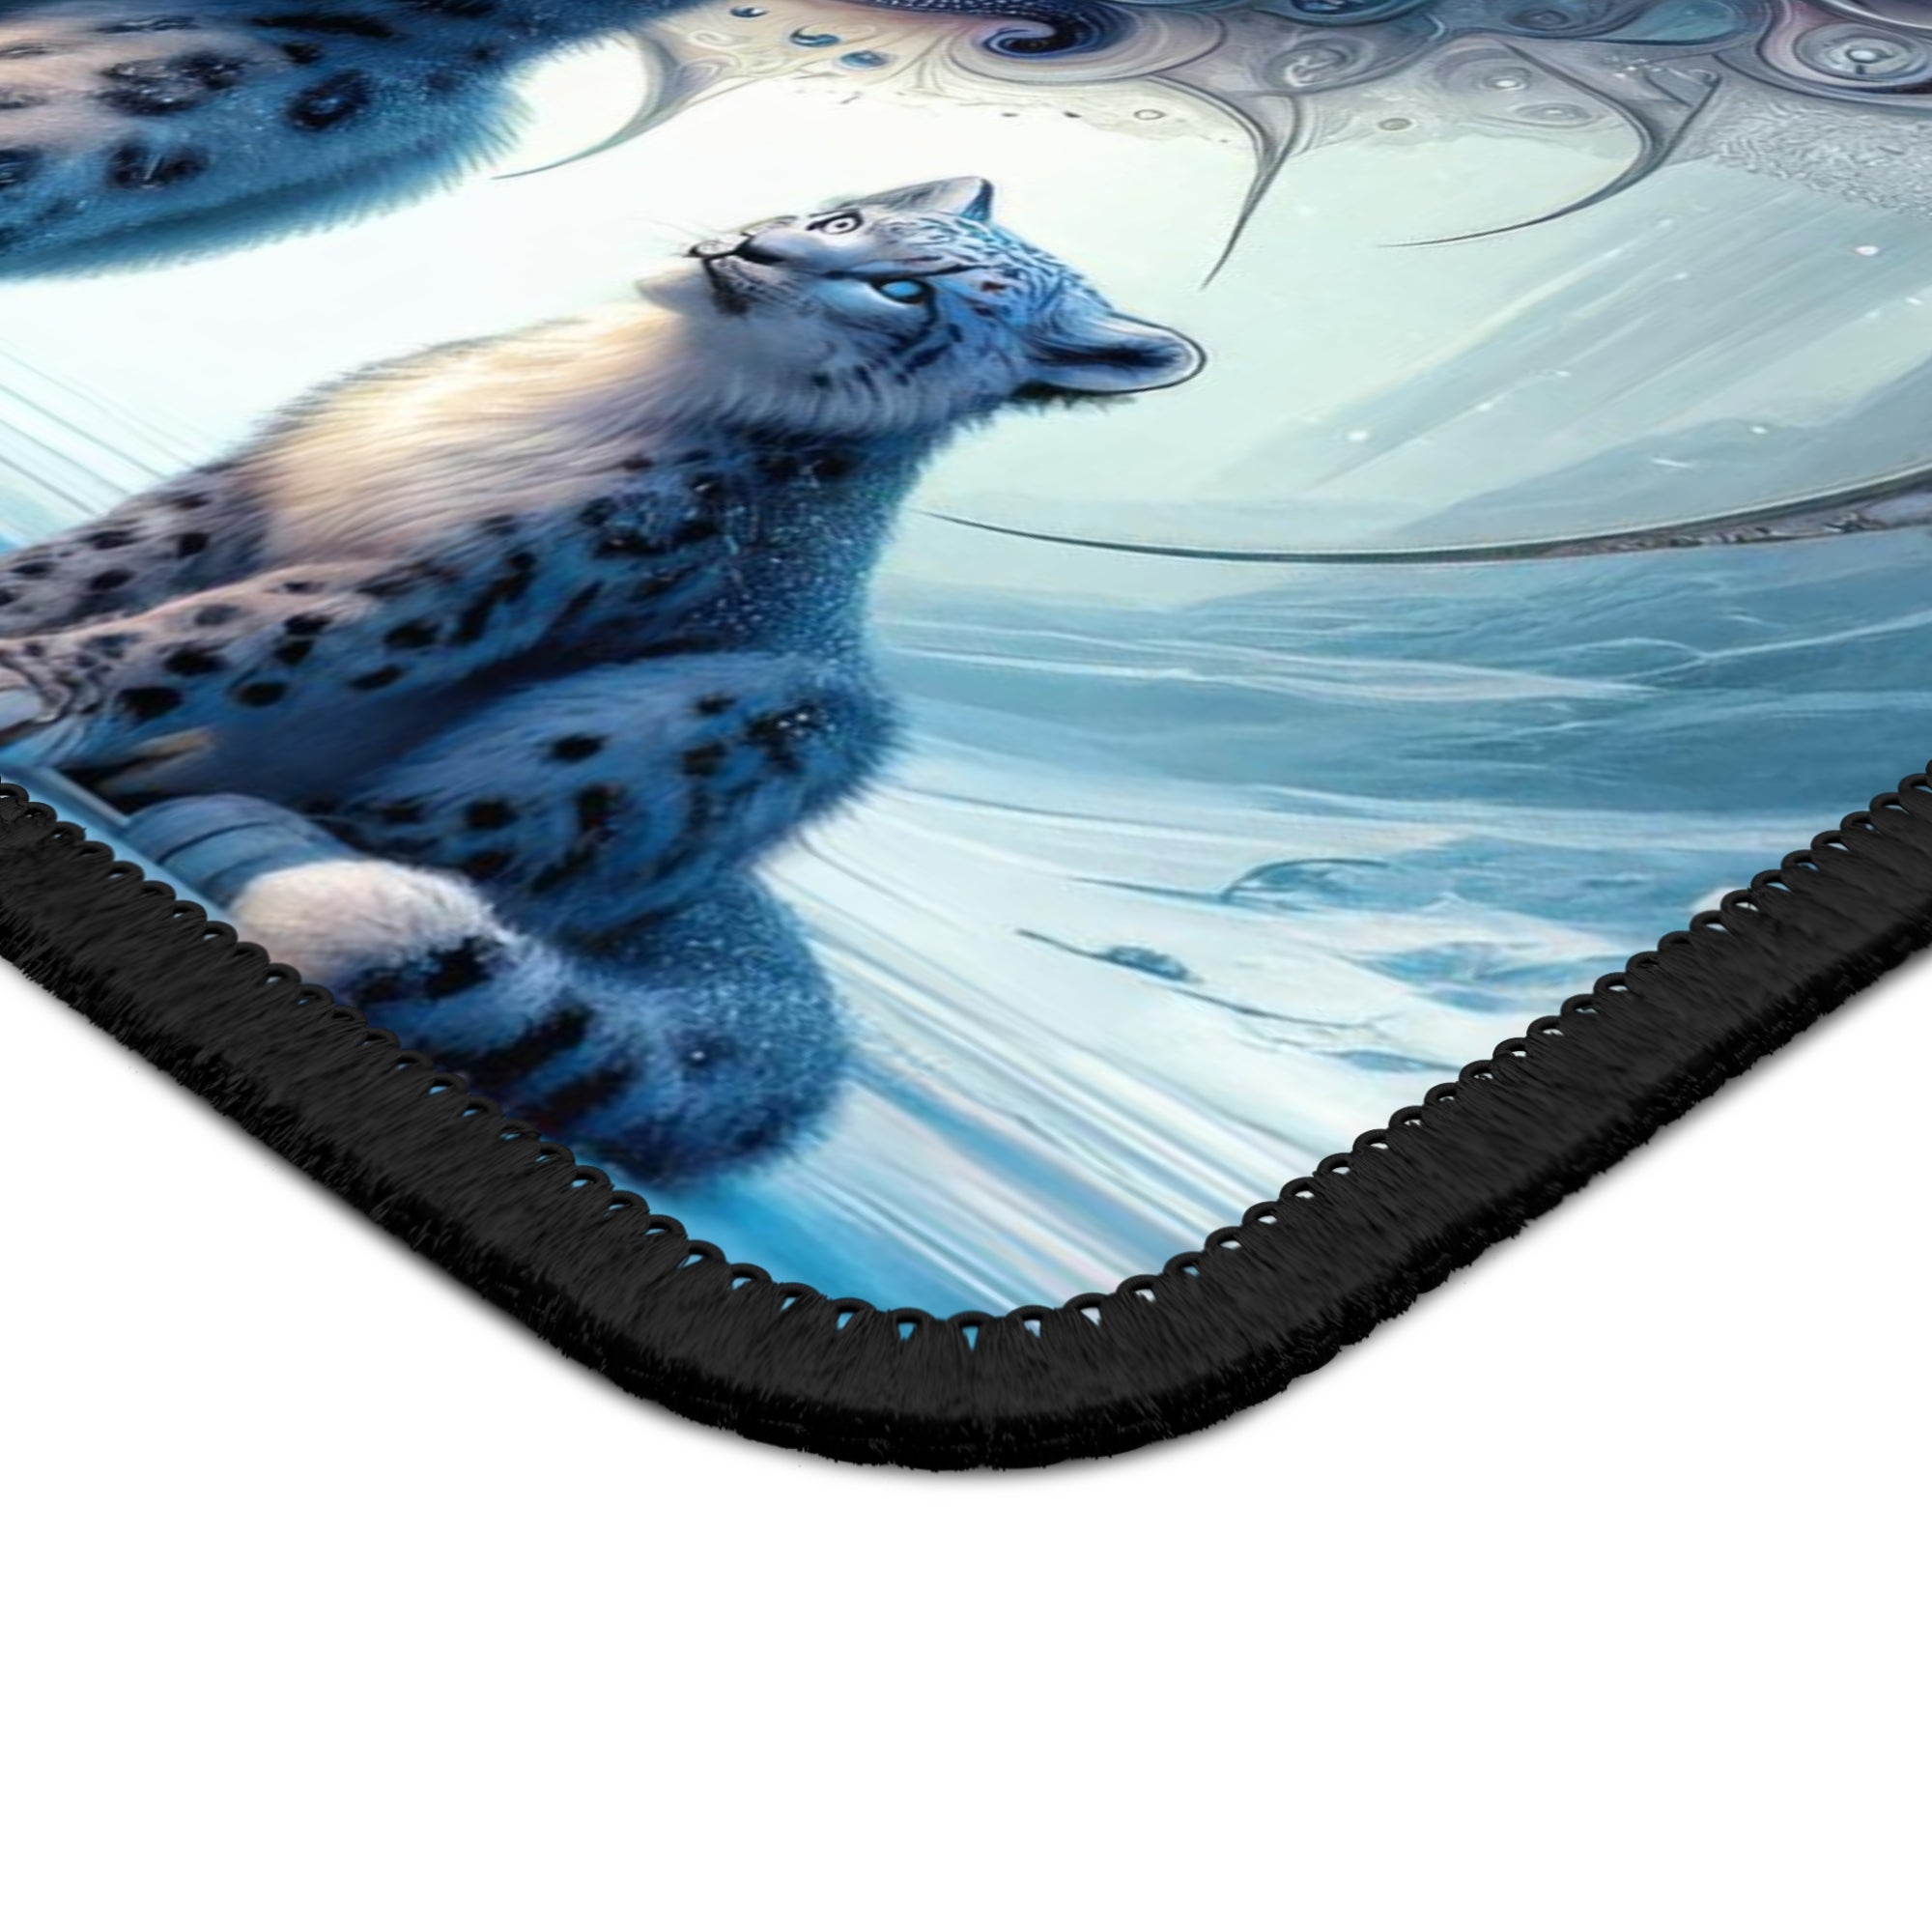 Frostwing Chronicles Mouse Pad